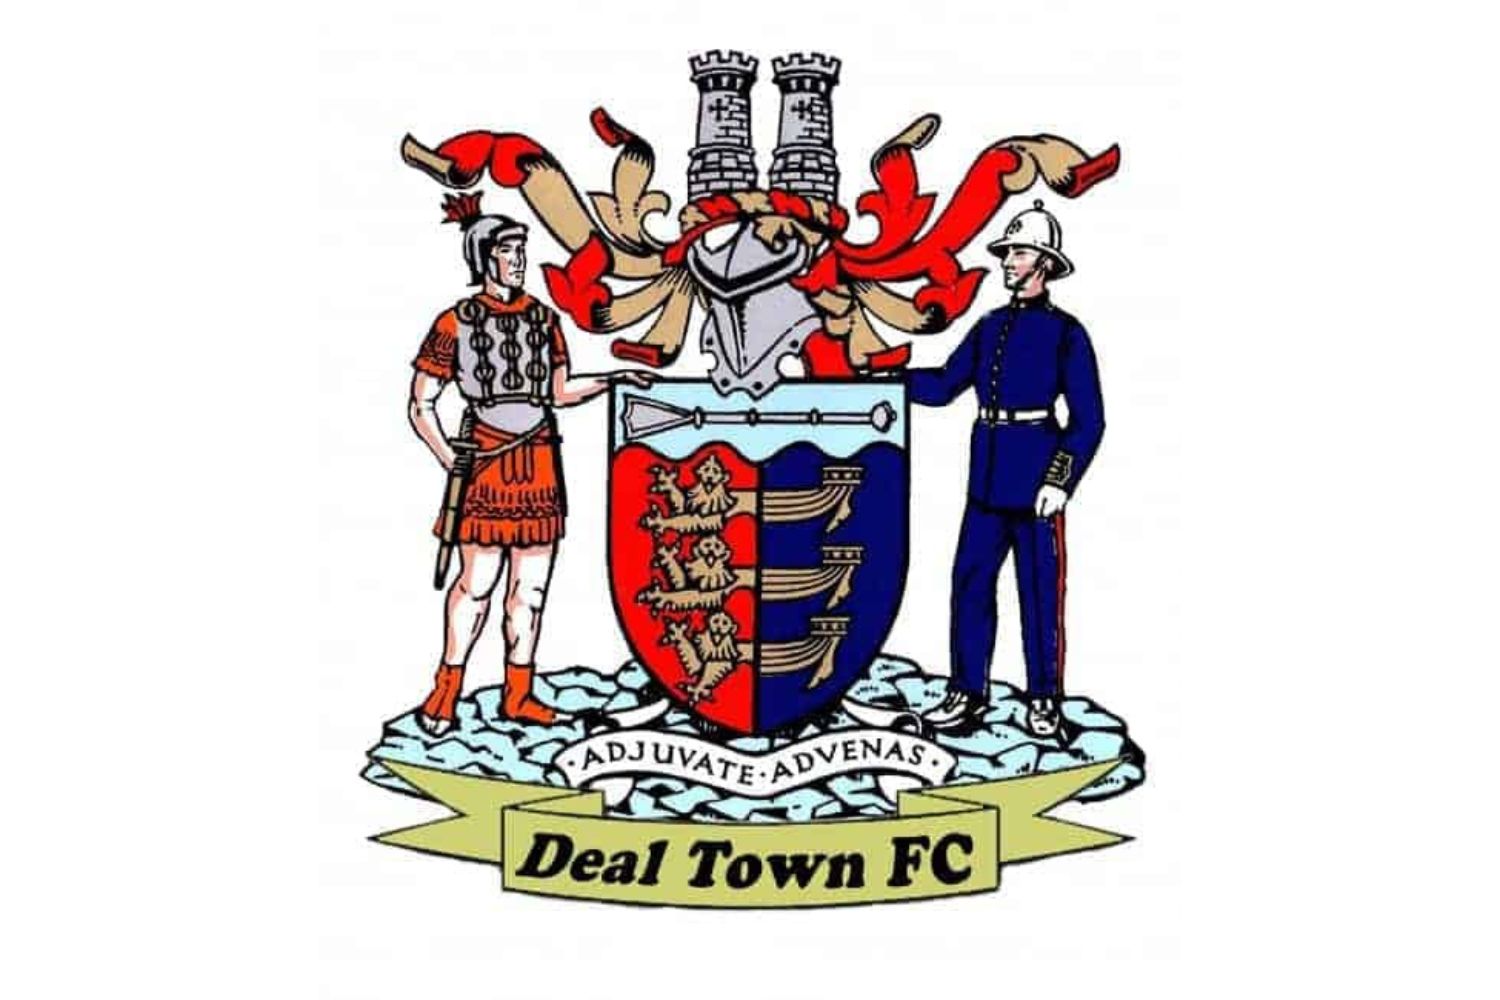 deal-town-fc-14-football-club-facts